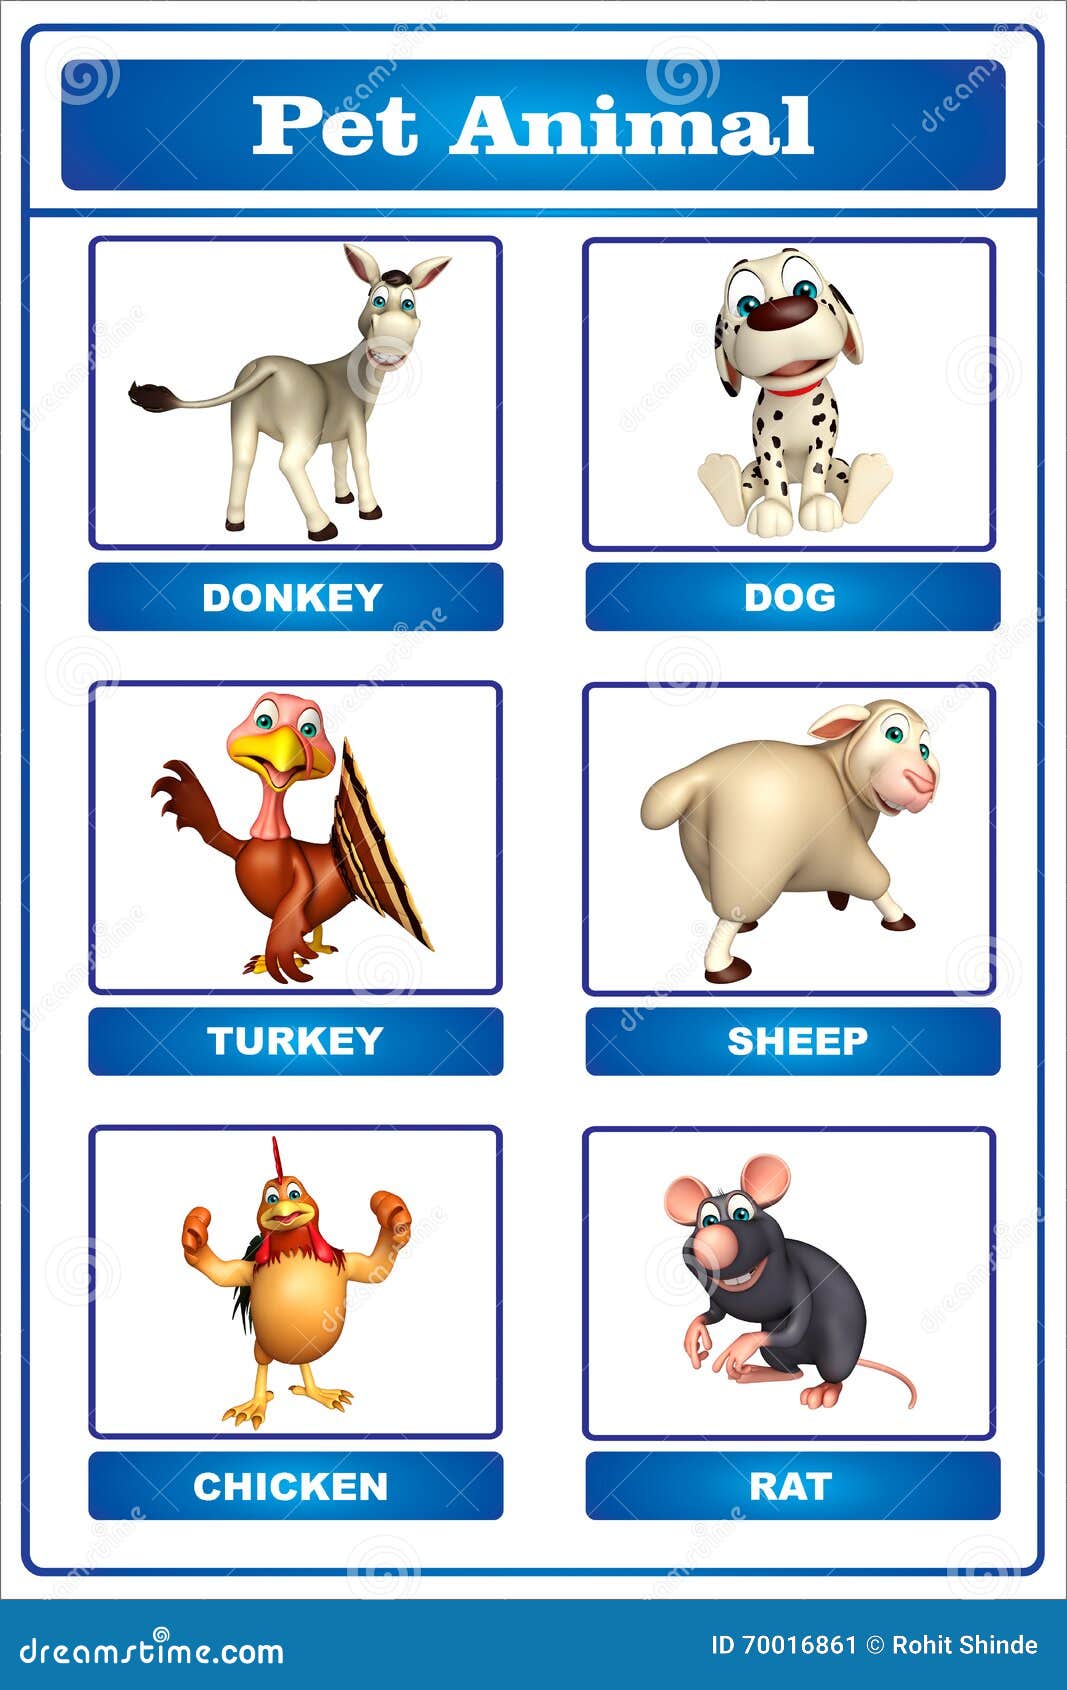 Pet Animal Picture Chart